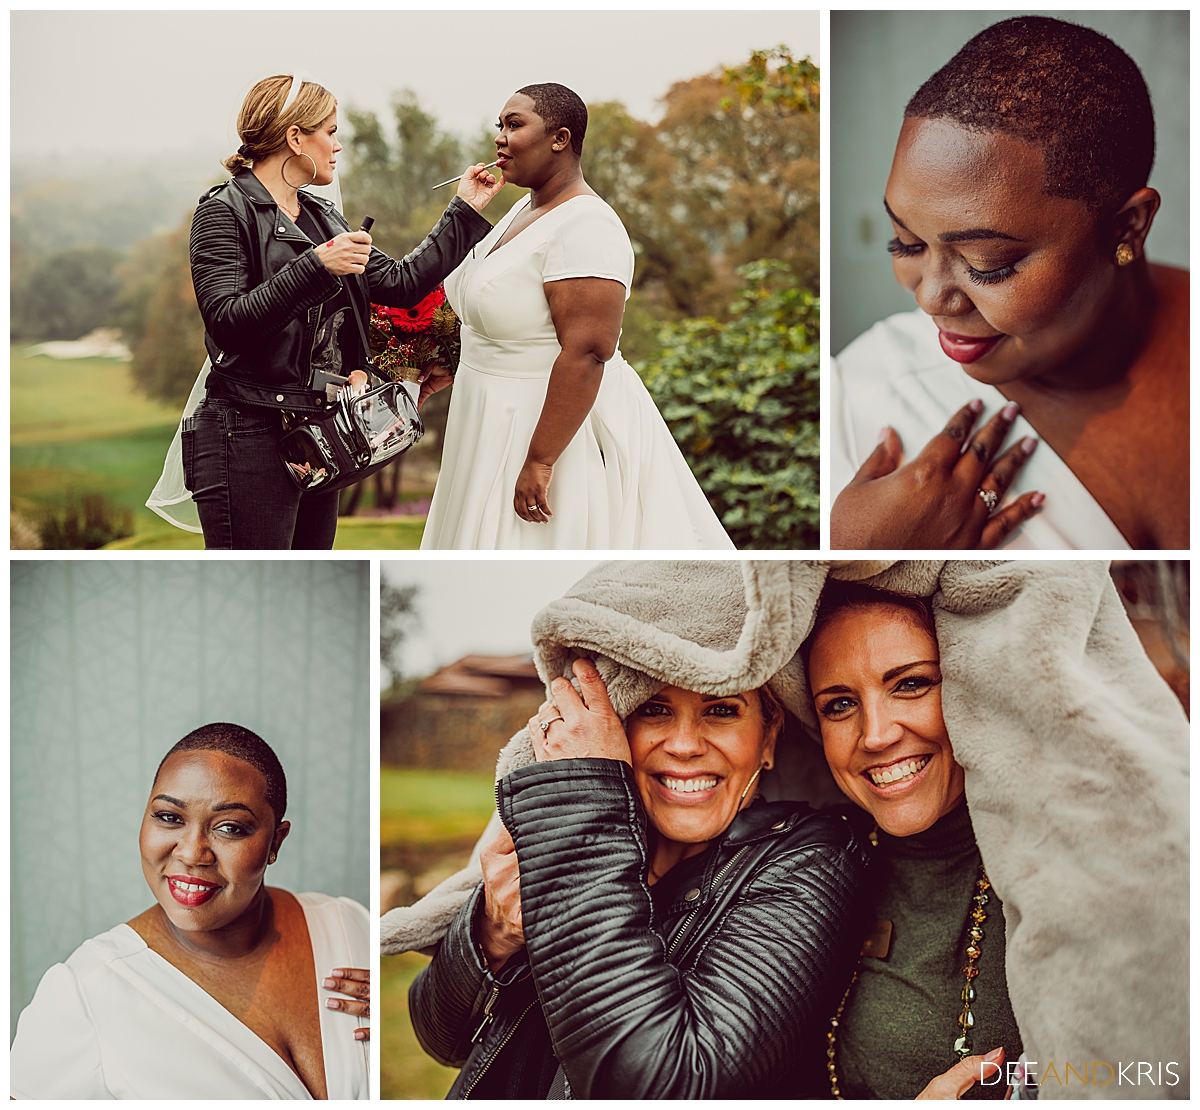 Four images: Tope left image of makeup artist Morgan Merrill reapplying lipstick to bride outdoors. Top right image of bride looking down with hand on her shoulder. Bottom left image of bride looking at camera smiling. Bottom right image of makeup artist Morgan Merrill and coordinator Kellie Collier smiling while under a blanket to block the rain.